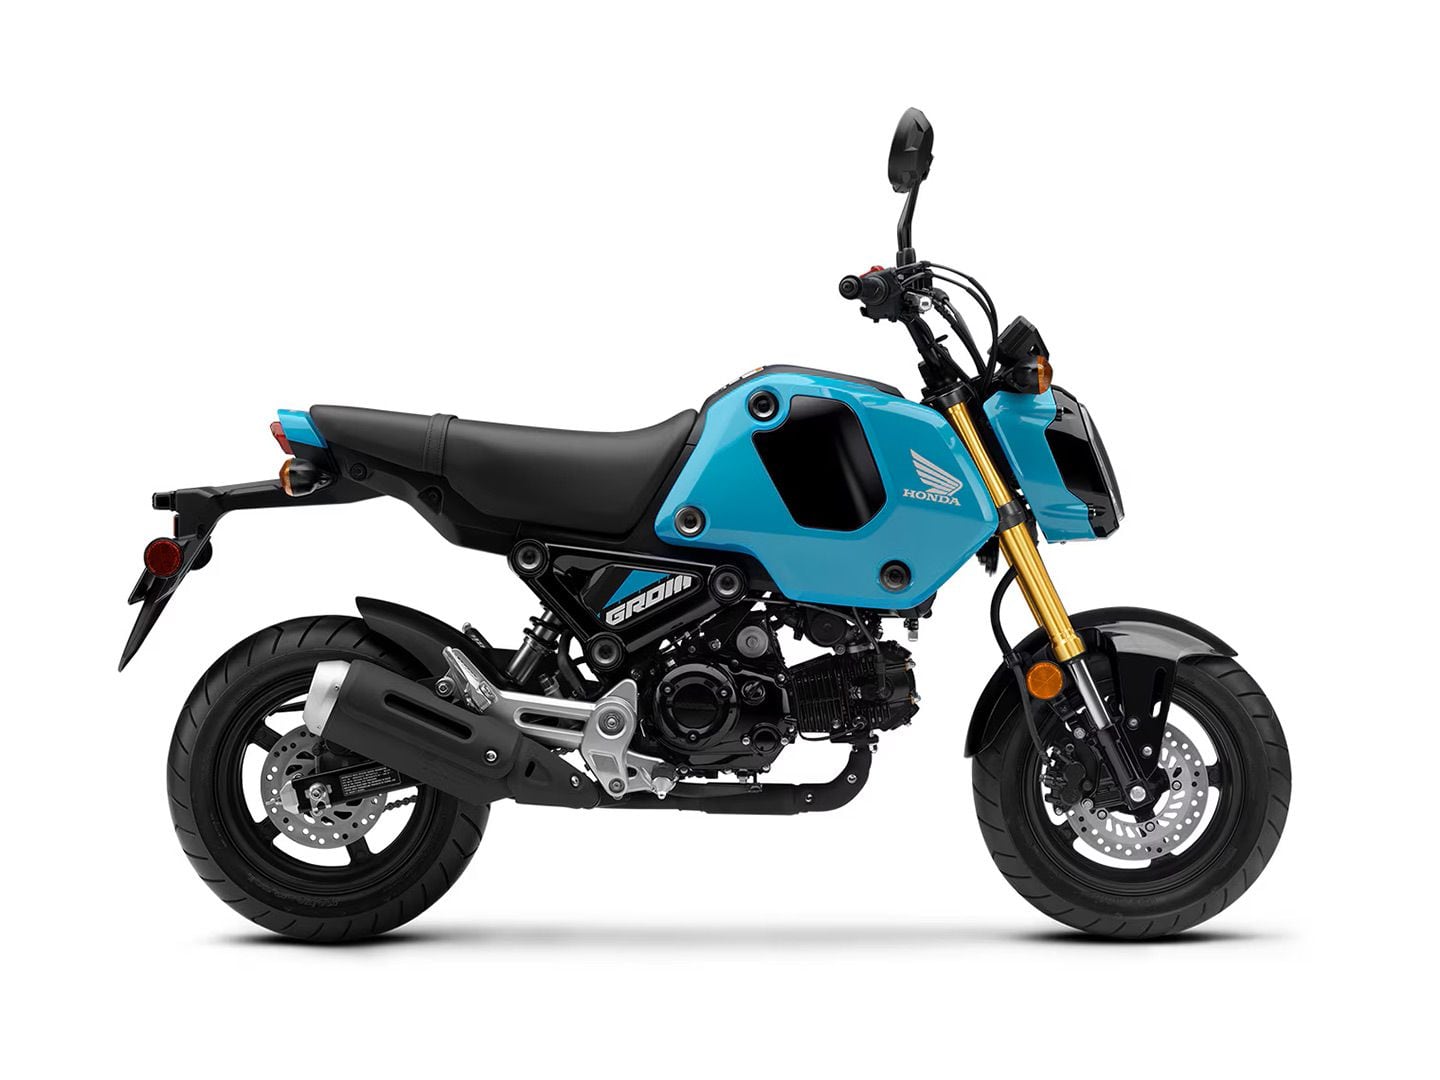 You just can’t deny the fun-loving appeal of the Honda Grom, but it’s surprisingly competent too—mini or not.